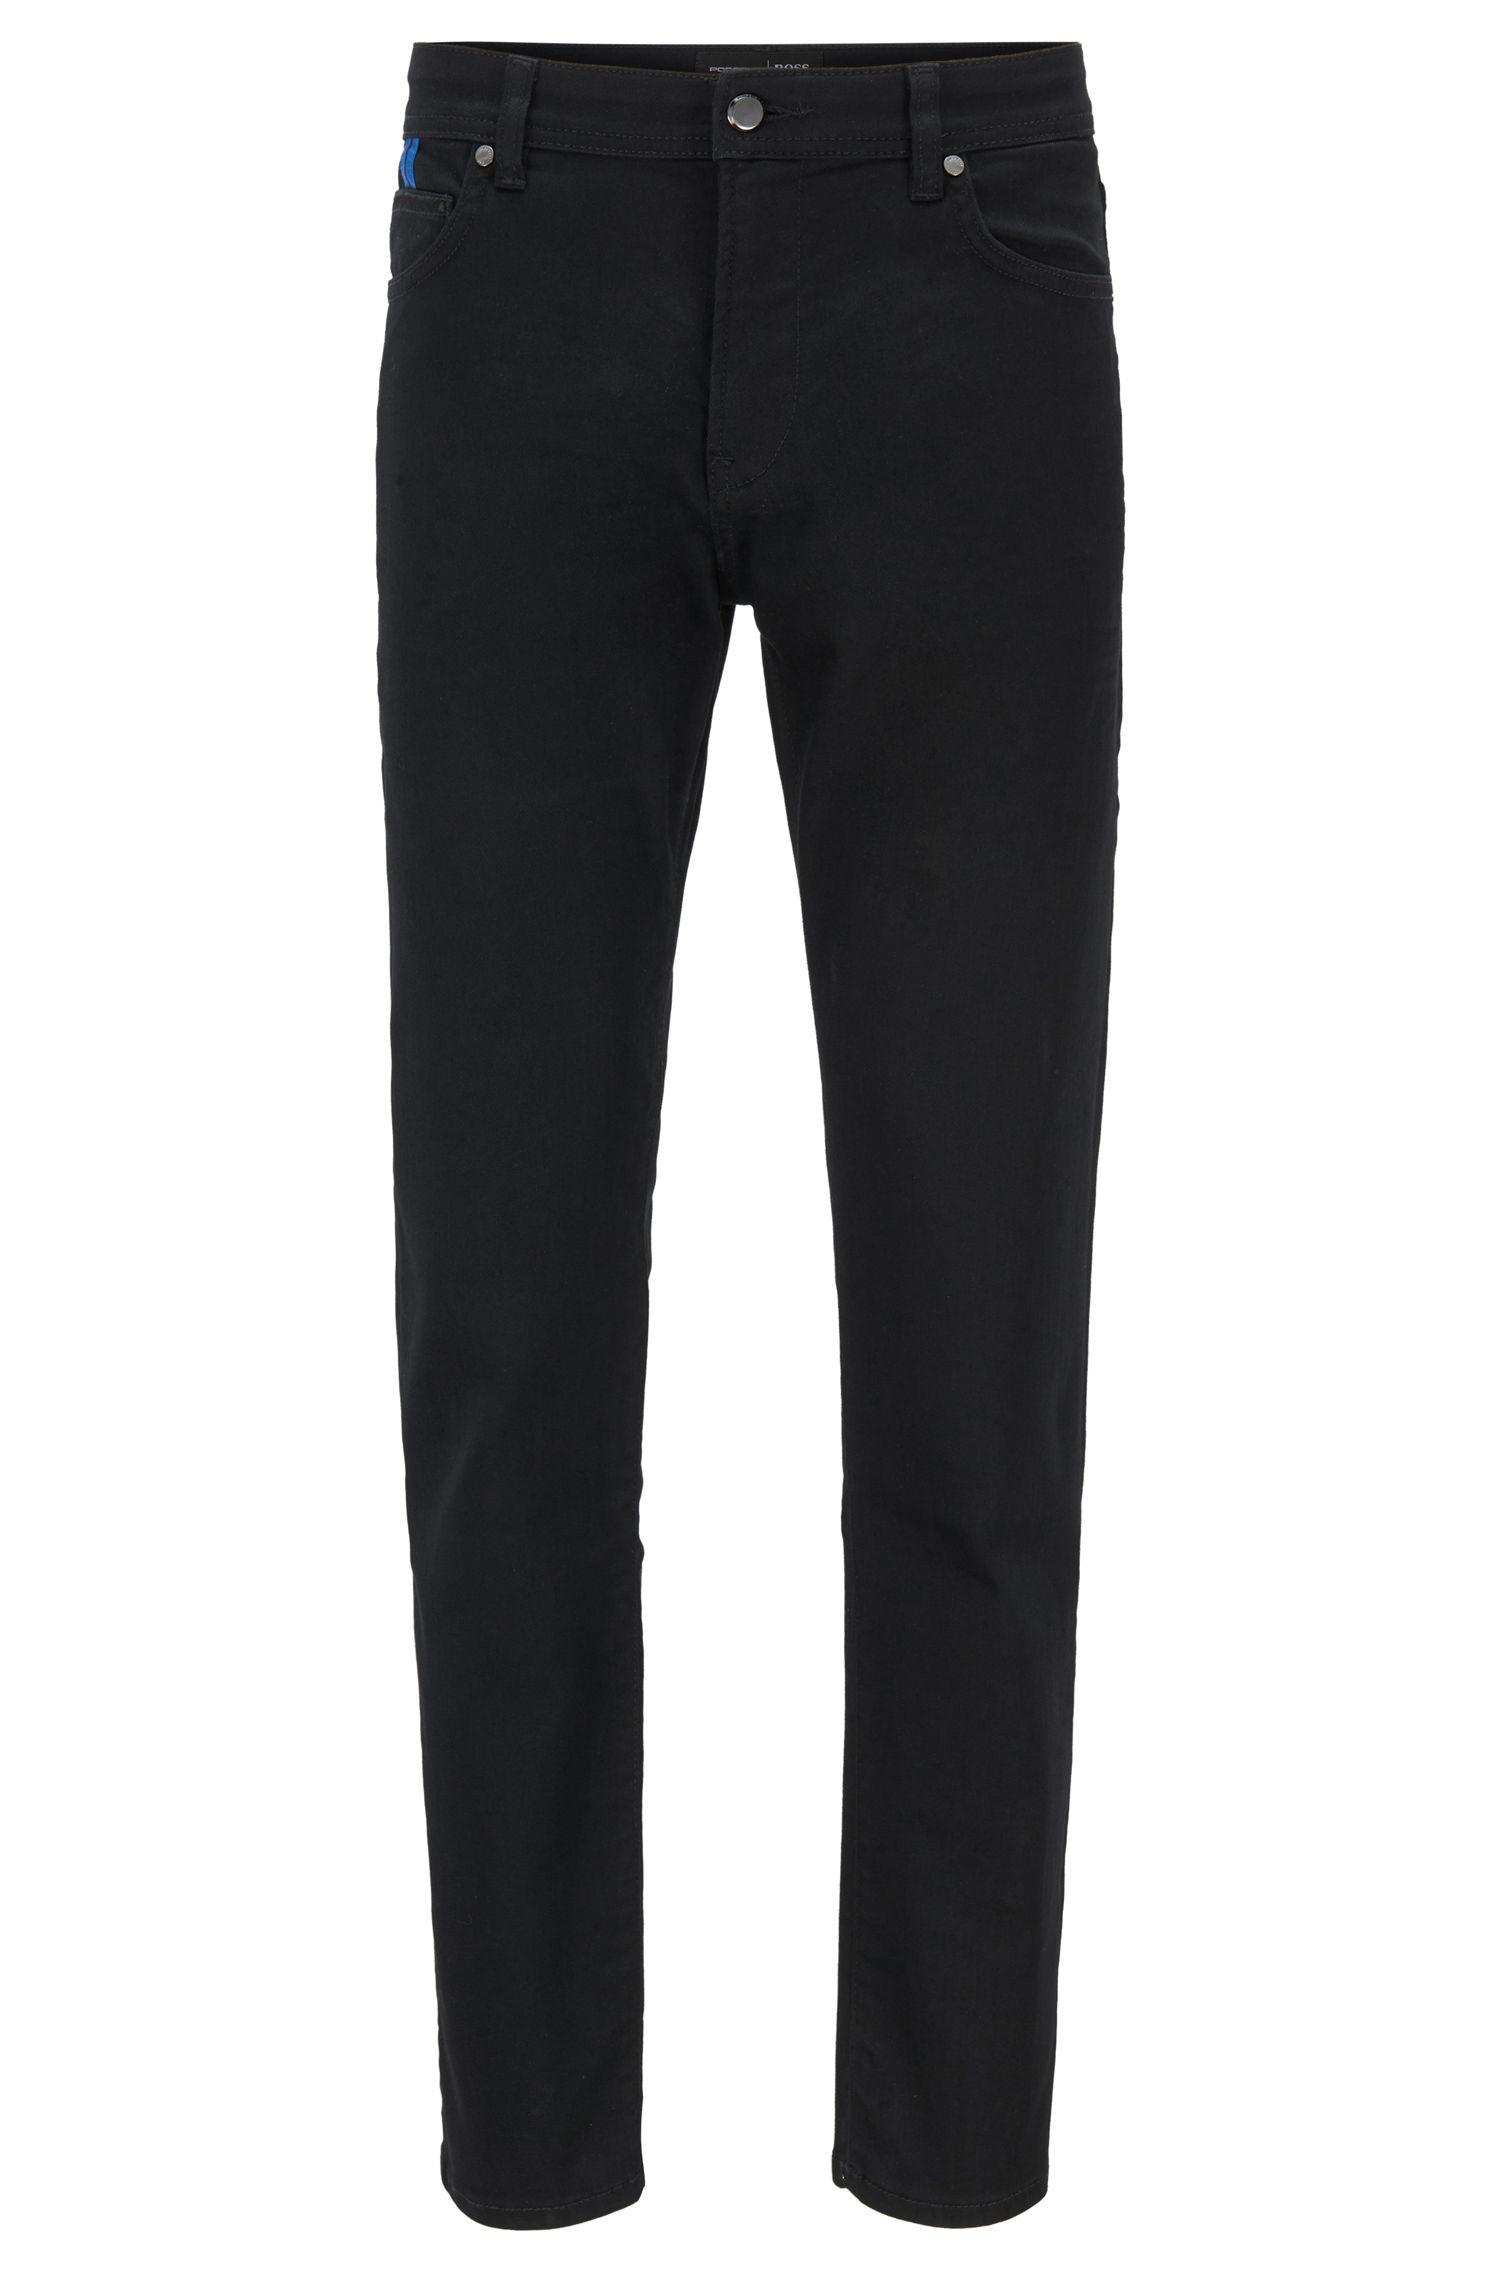 BOSS by Hugo Boss Tapered Fit Jeans In Black Stretch Denim for Men - Lyst